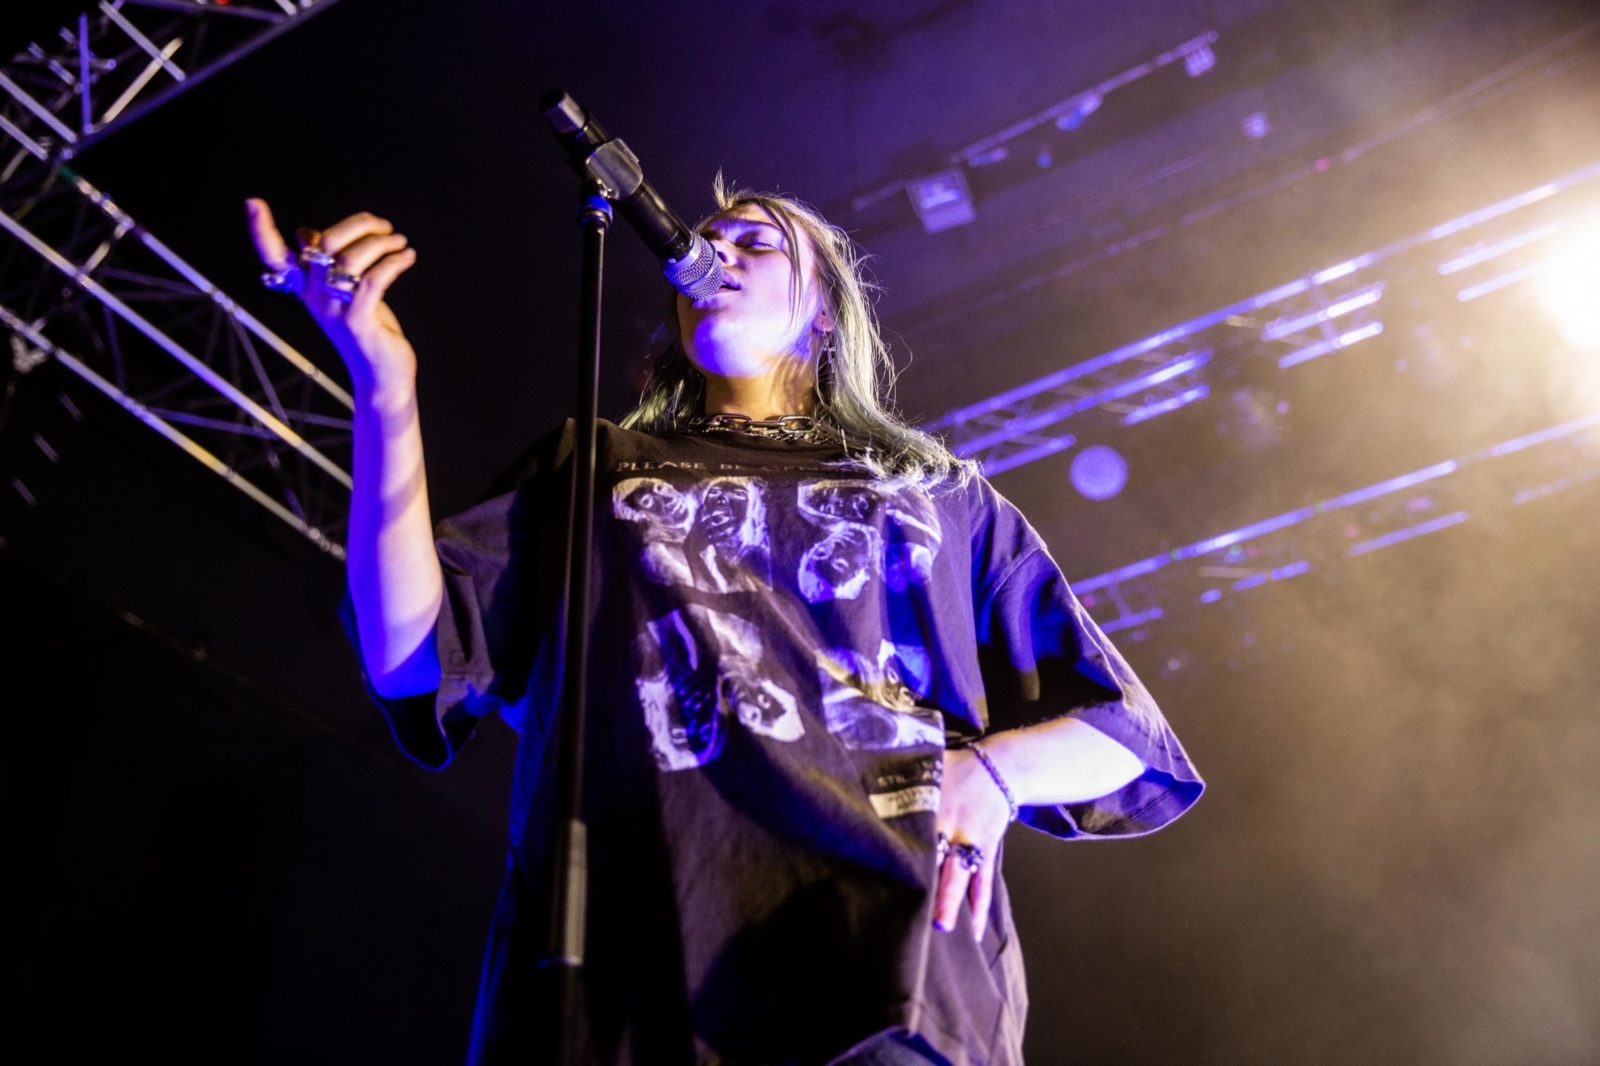 Billie Eilish, Vampire Weekend, Chance The Rapper and more to play Las Vegas festival Life Is Beautiful